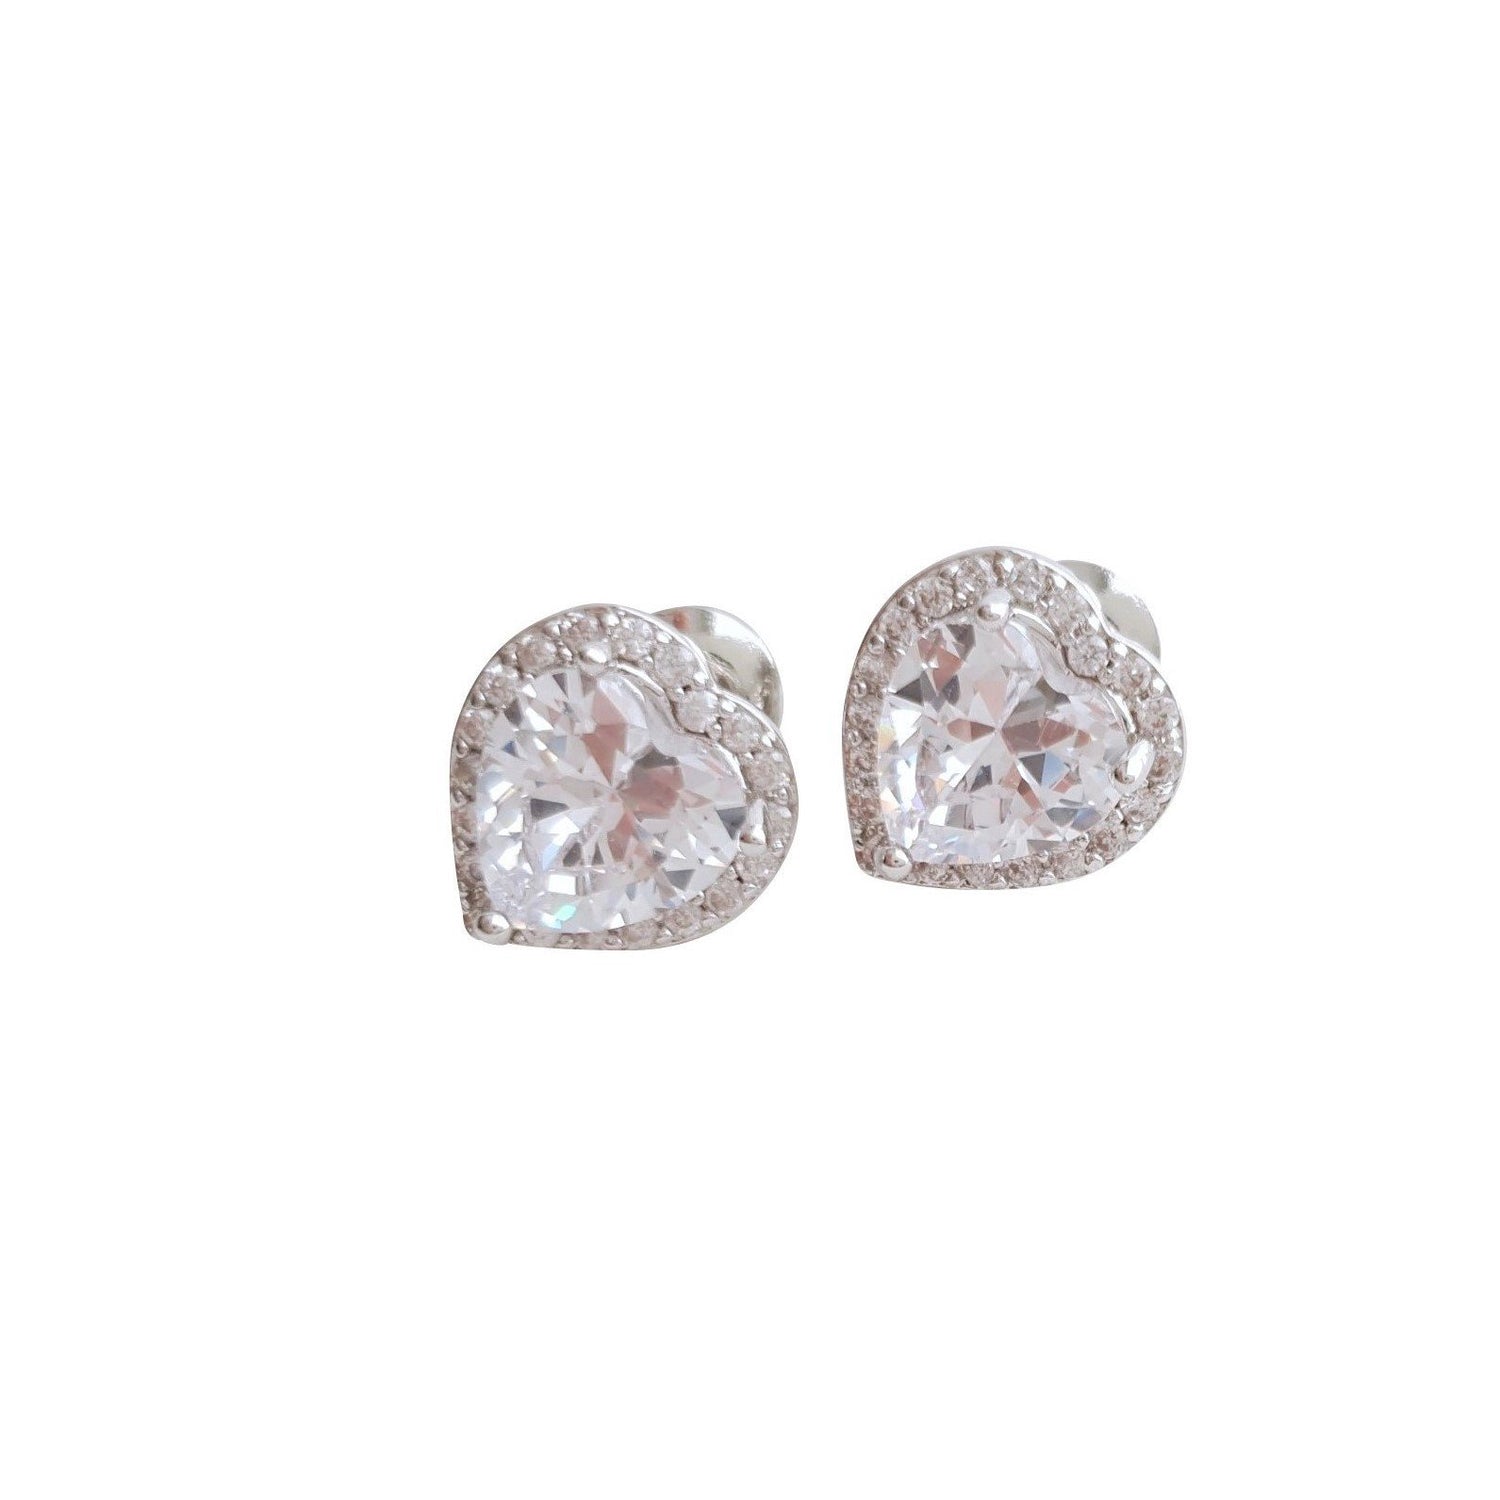 Cubic Zirconia Heart Earrings for Bridesmaids-Diana - PoetryDesigns